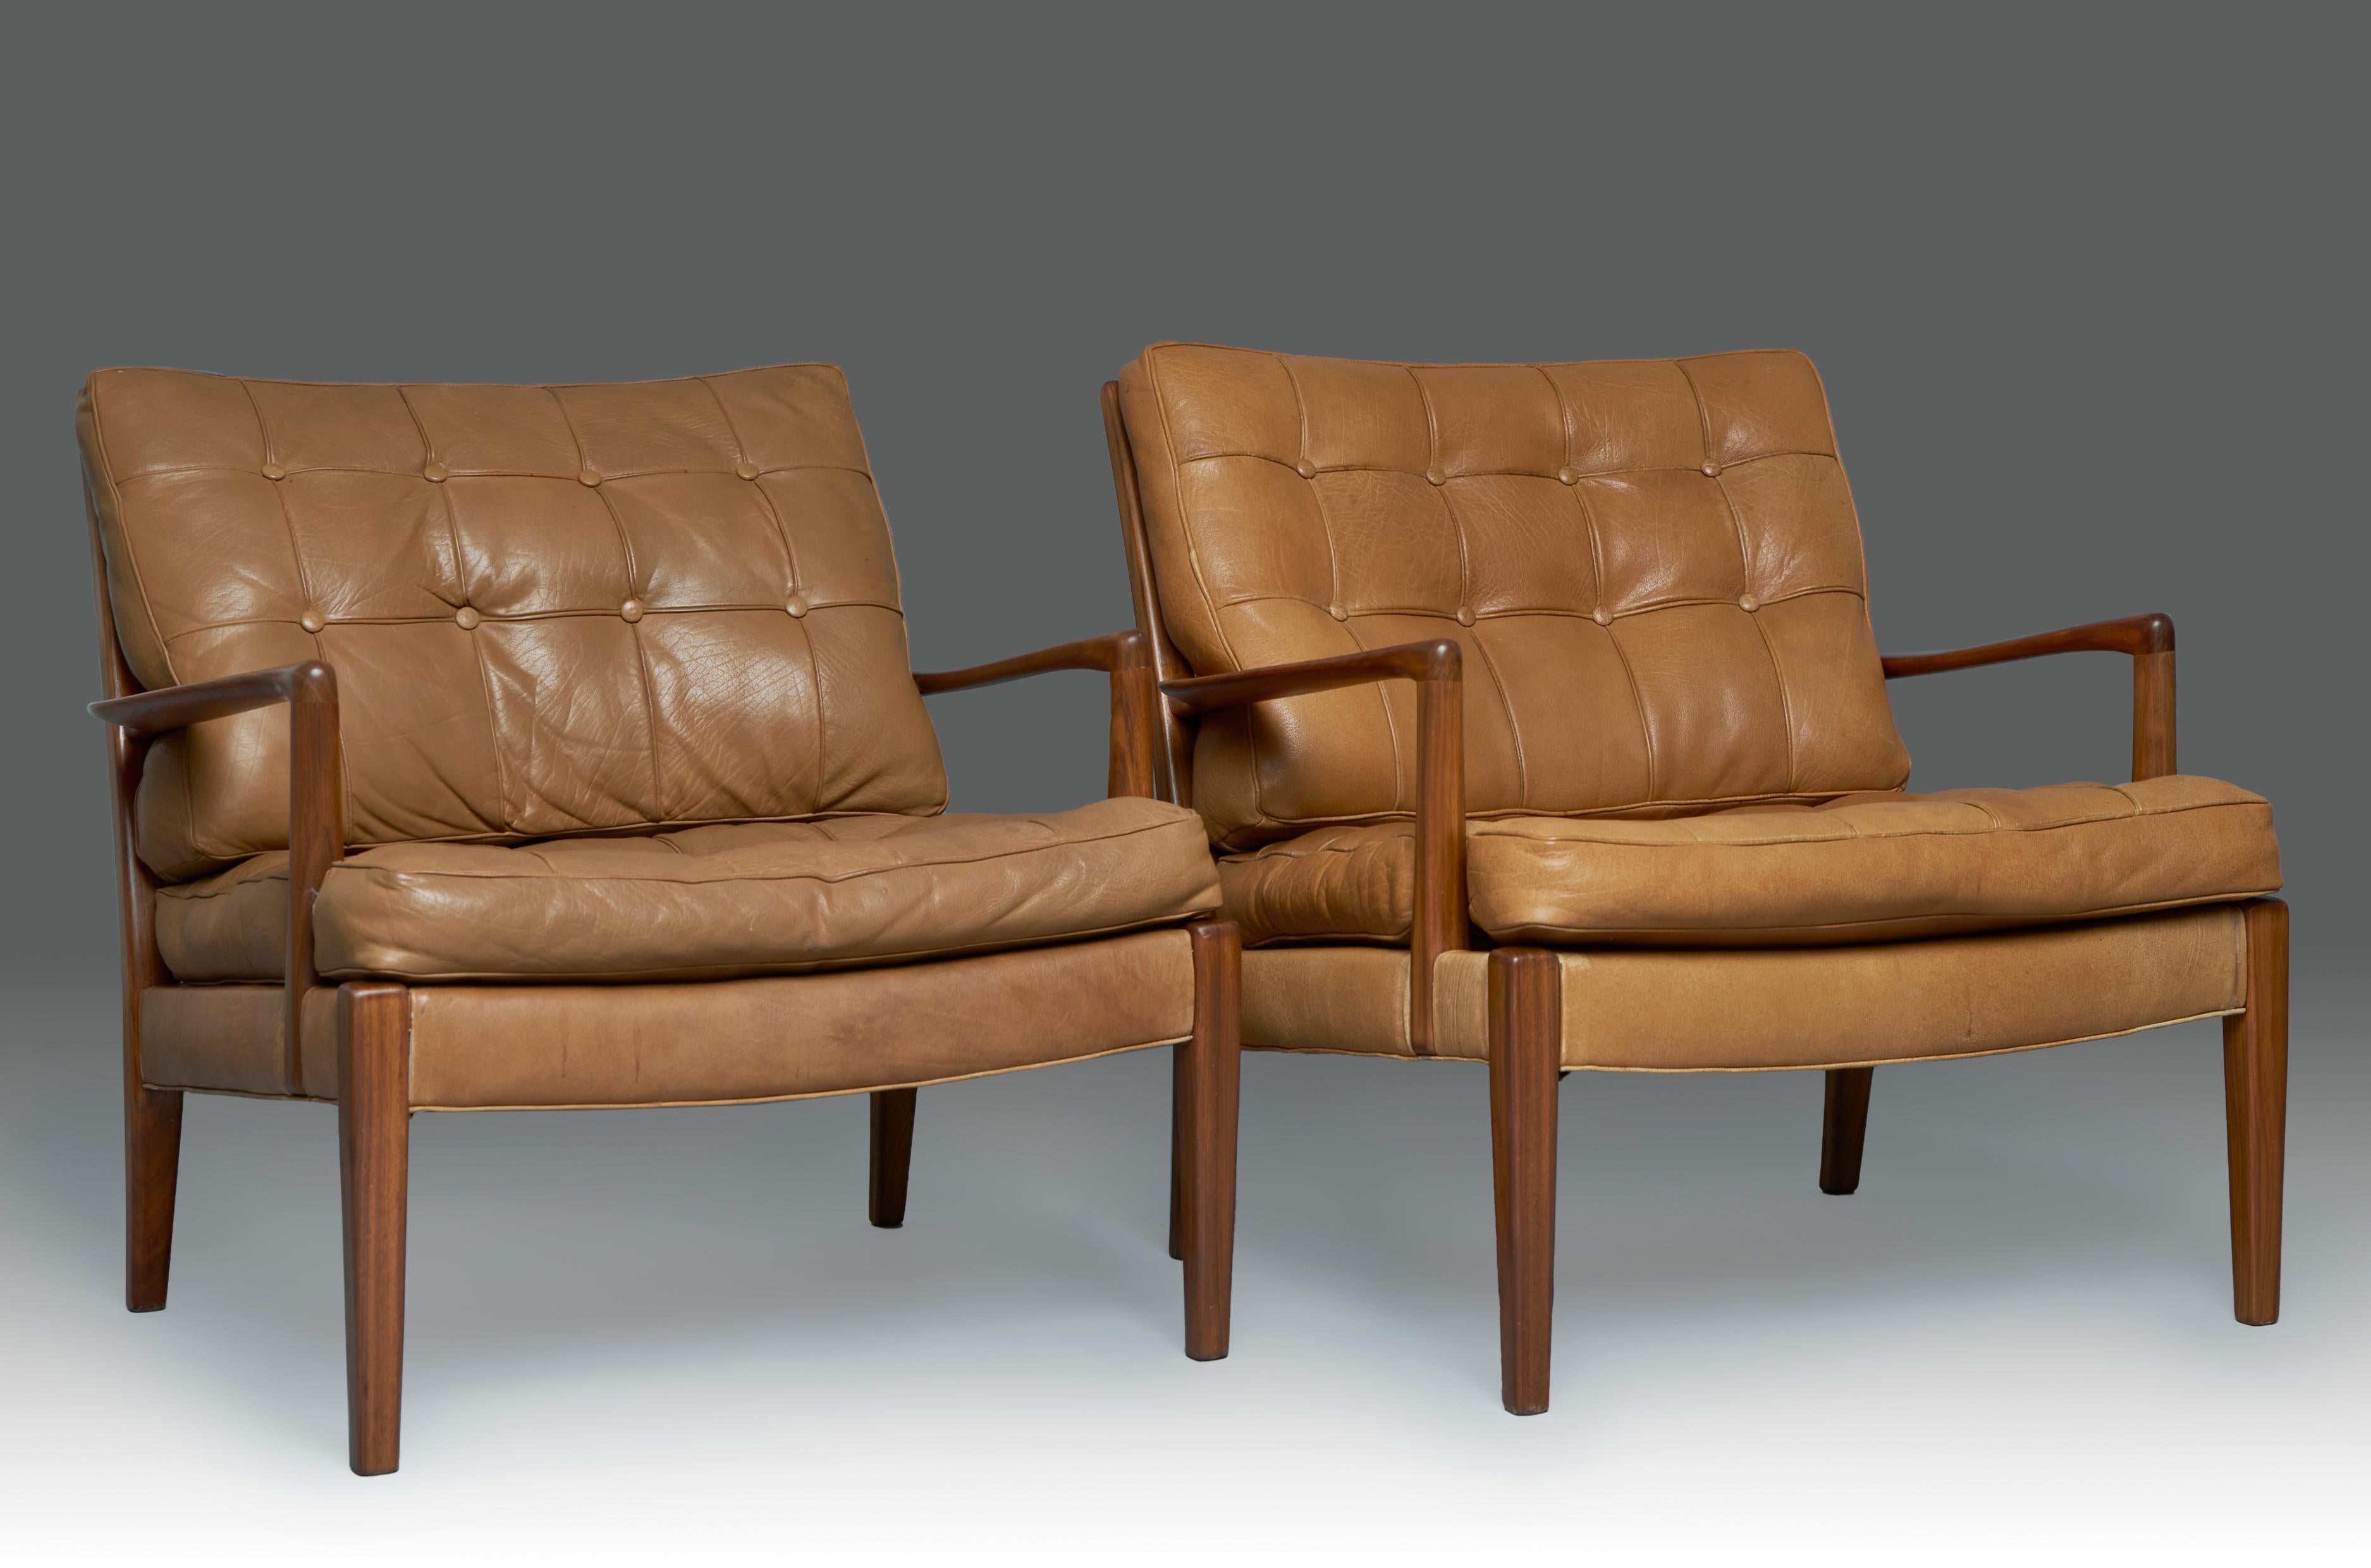 Arne Norell ‘’Löven’’ armchairs in walnut and leather. Restored wood and original leather with patina. Sweden 1960’s 
EDIT: only one available. (don't hesitate in asking for more information)
Arne Norell was a Swedish designer founder of the